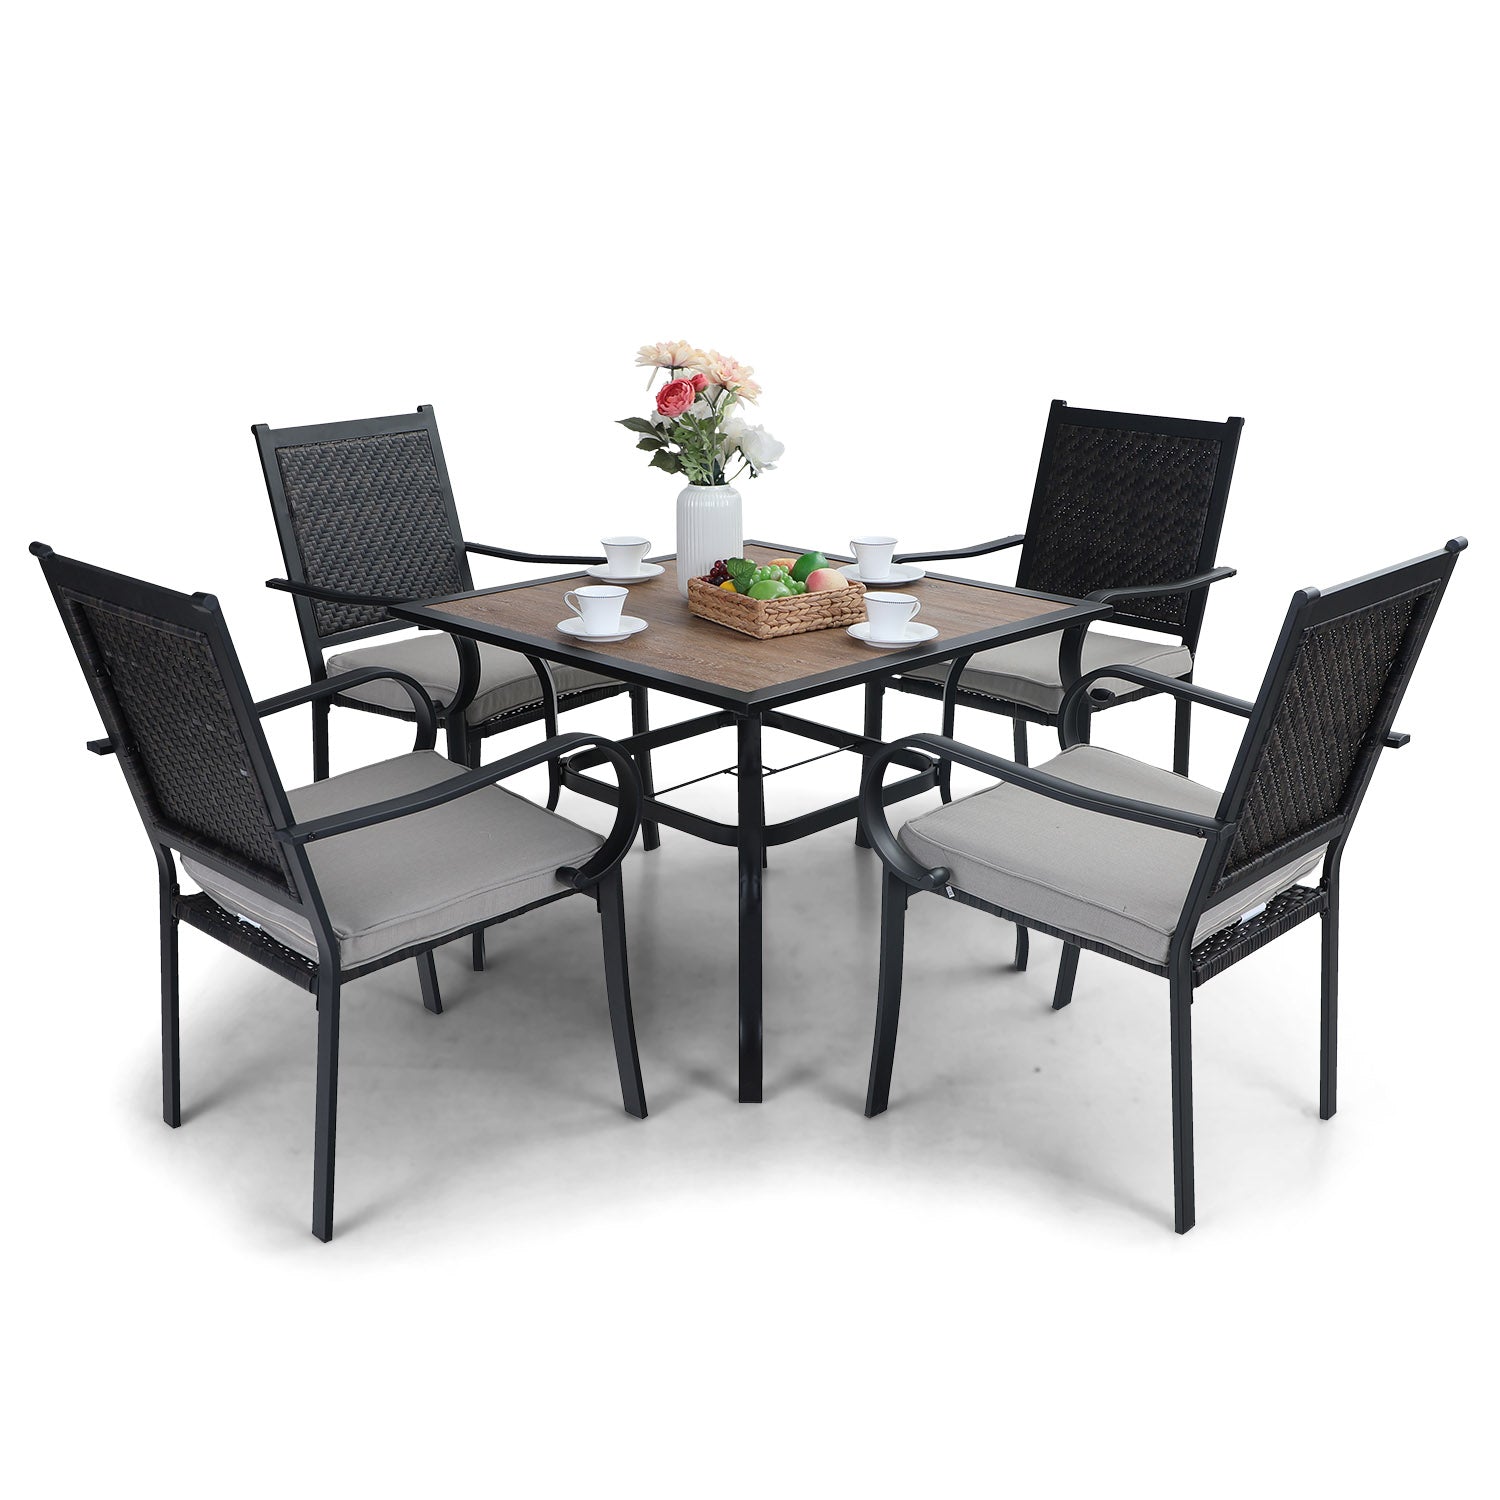 PHI VILLA 5-Piece Rattan Dining Chairs & Wood-look Square Table Patio Dining Set